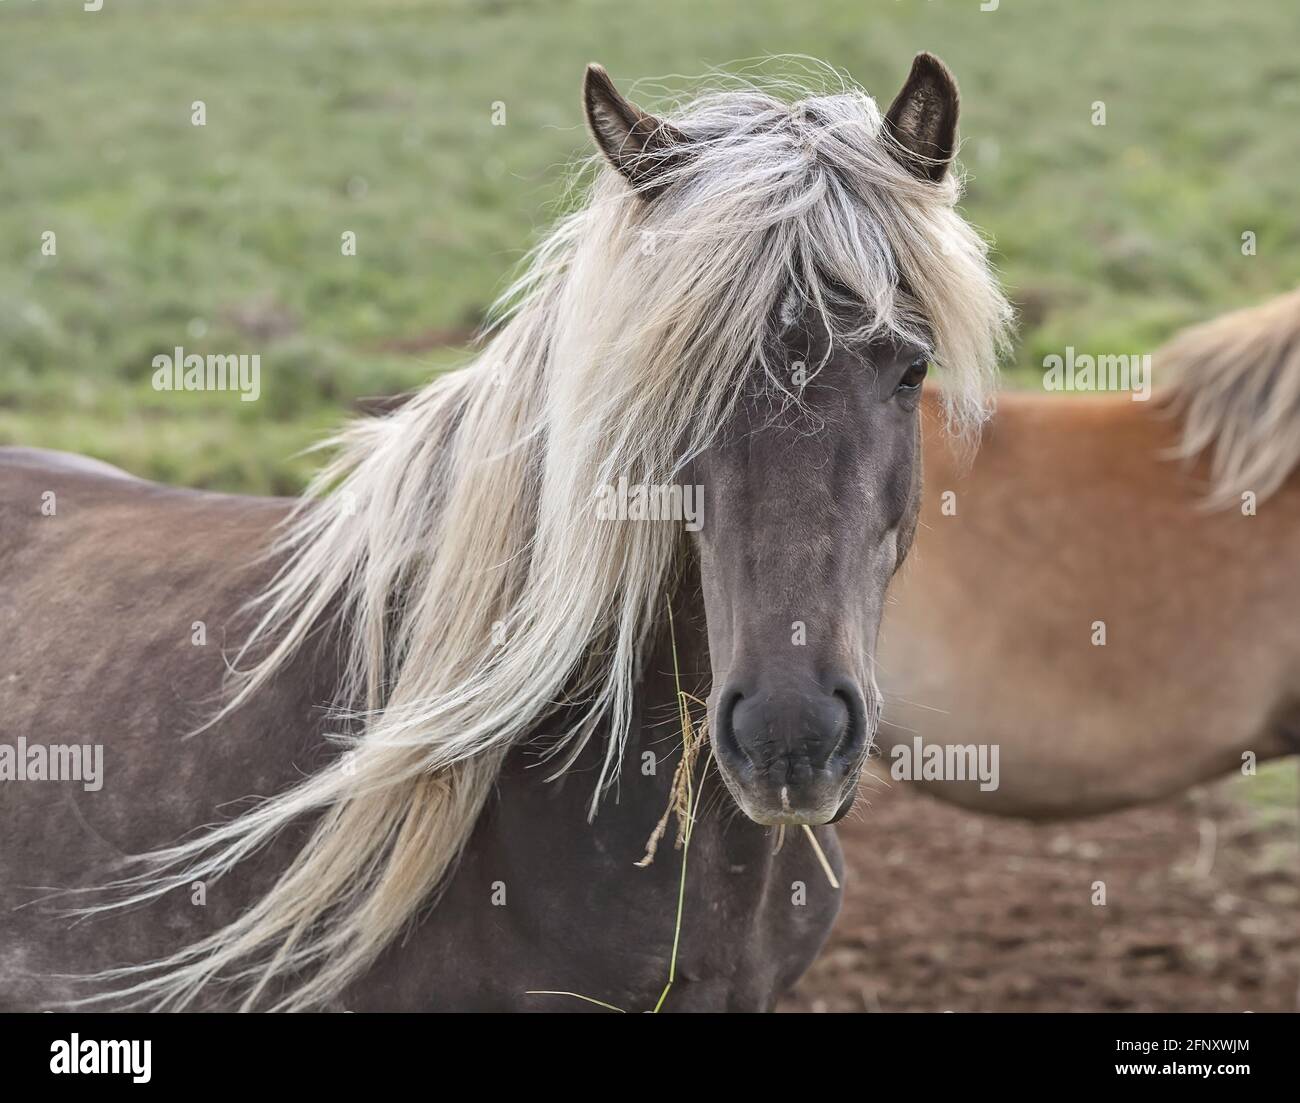 Beautiful and unique Icelandic horse with dark hide and blonde mane. Facing camera in a calm pose. Iceland. Stock Photo